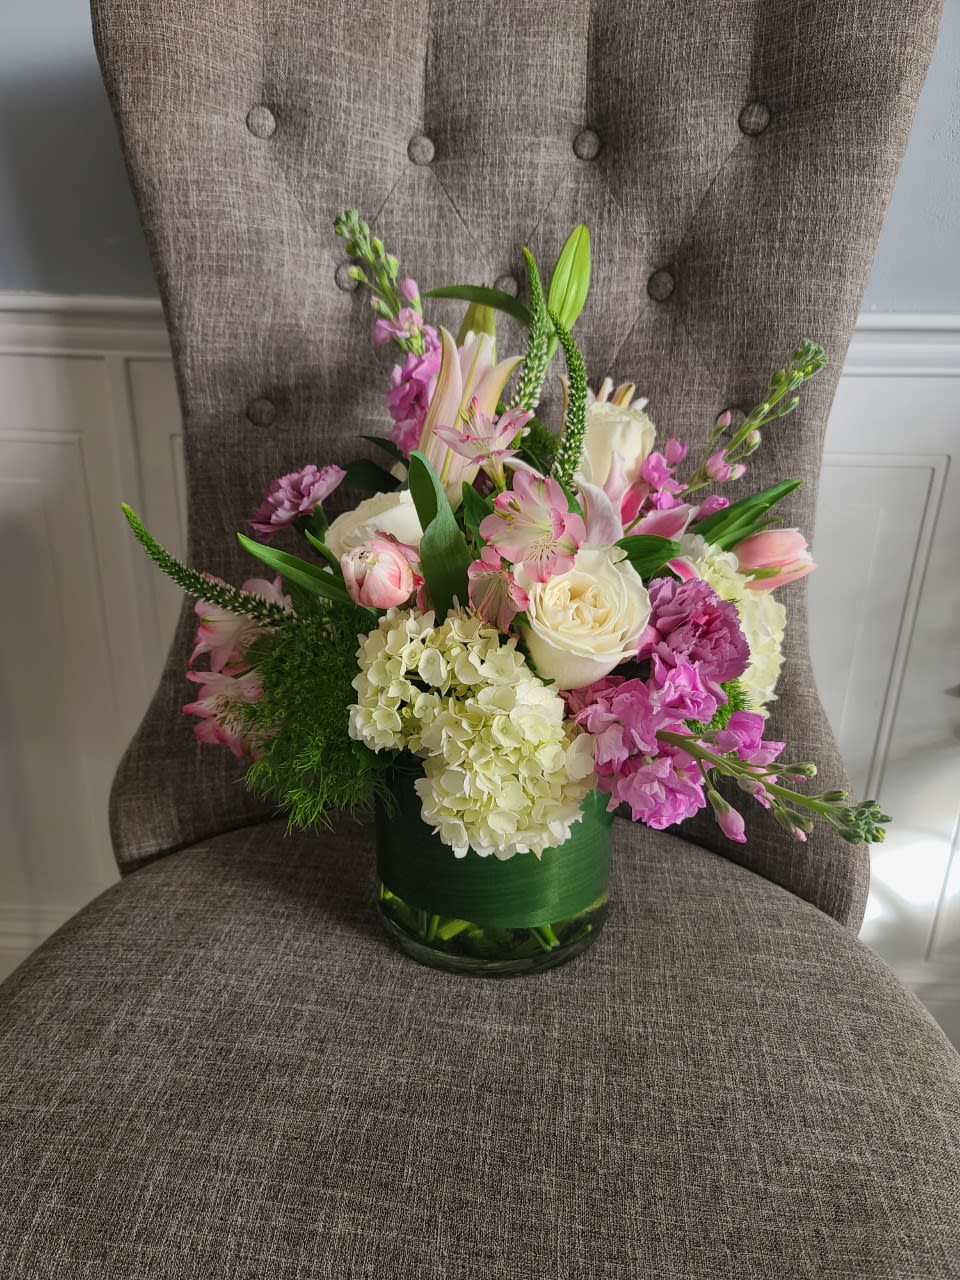 In a glass leaf lines cylinder, pastel blooms offer spring textures and